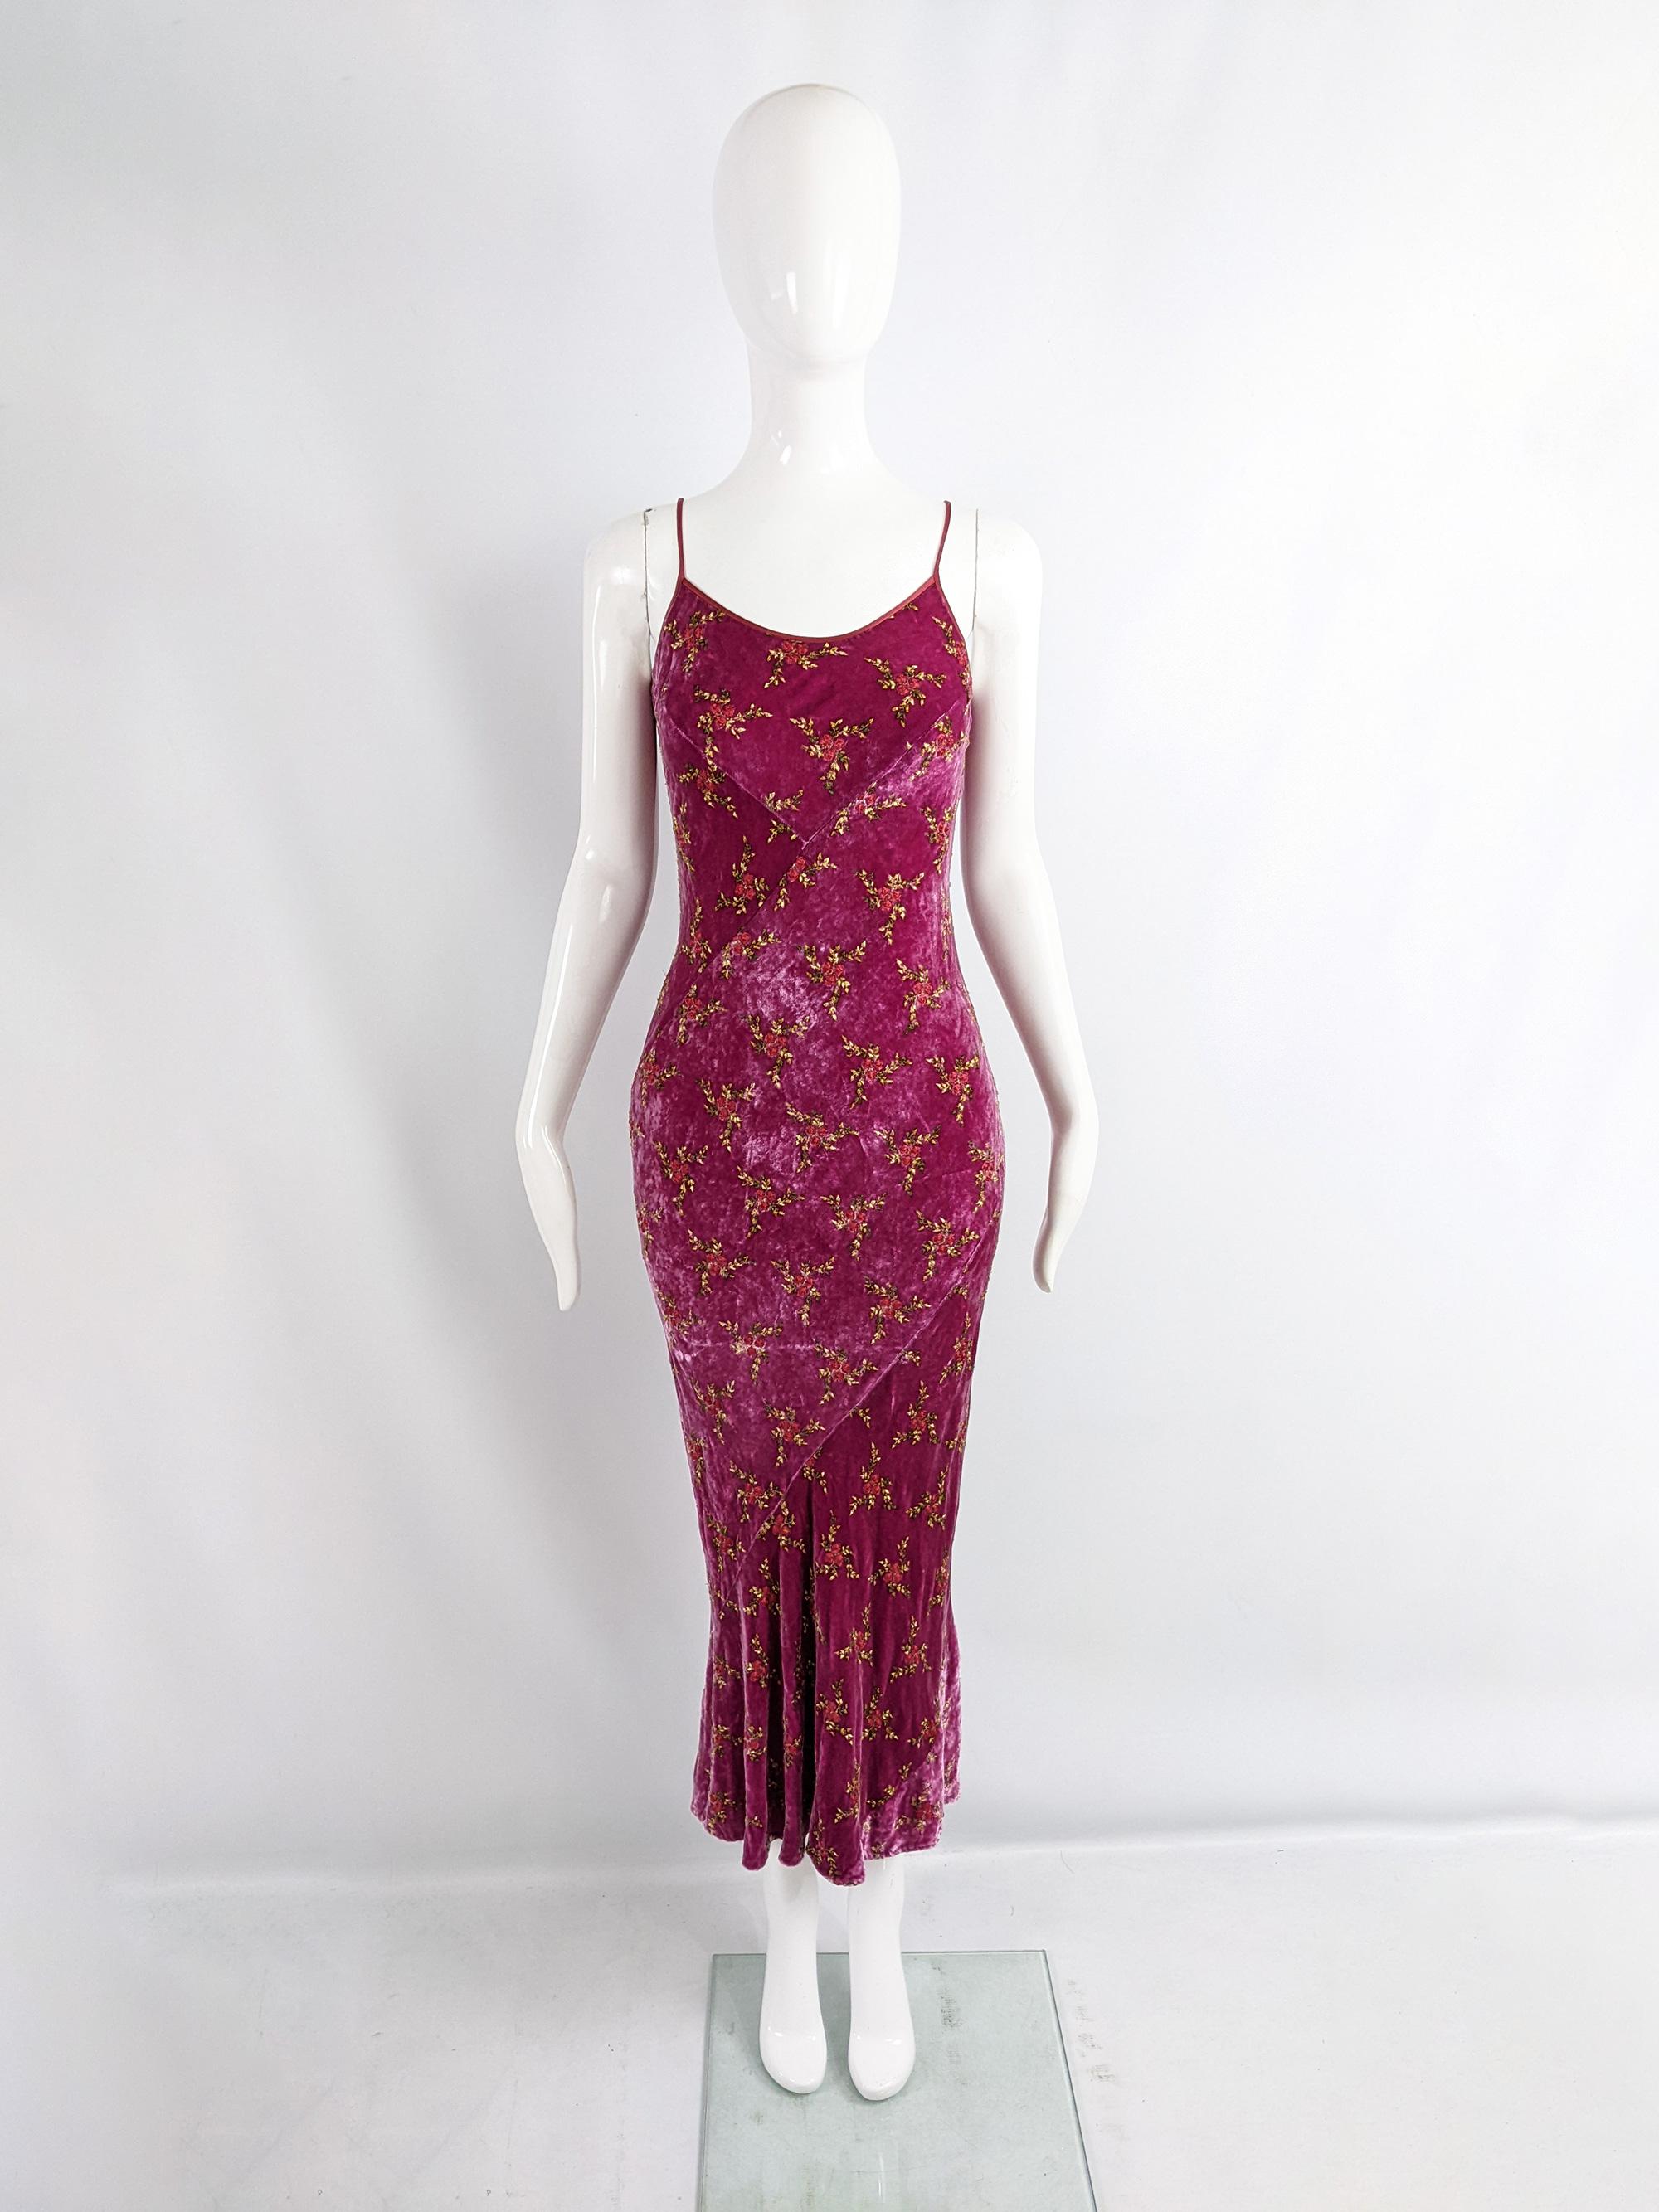 An incredible vintage womens maxi dress from the 90s by luxury British fashion designer, Edina Ronay. In a bias cut silk blend velvet with pure silk floral embroidery throughout. It has sexy satin trim to the neckline and a low back.

Size: Marked